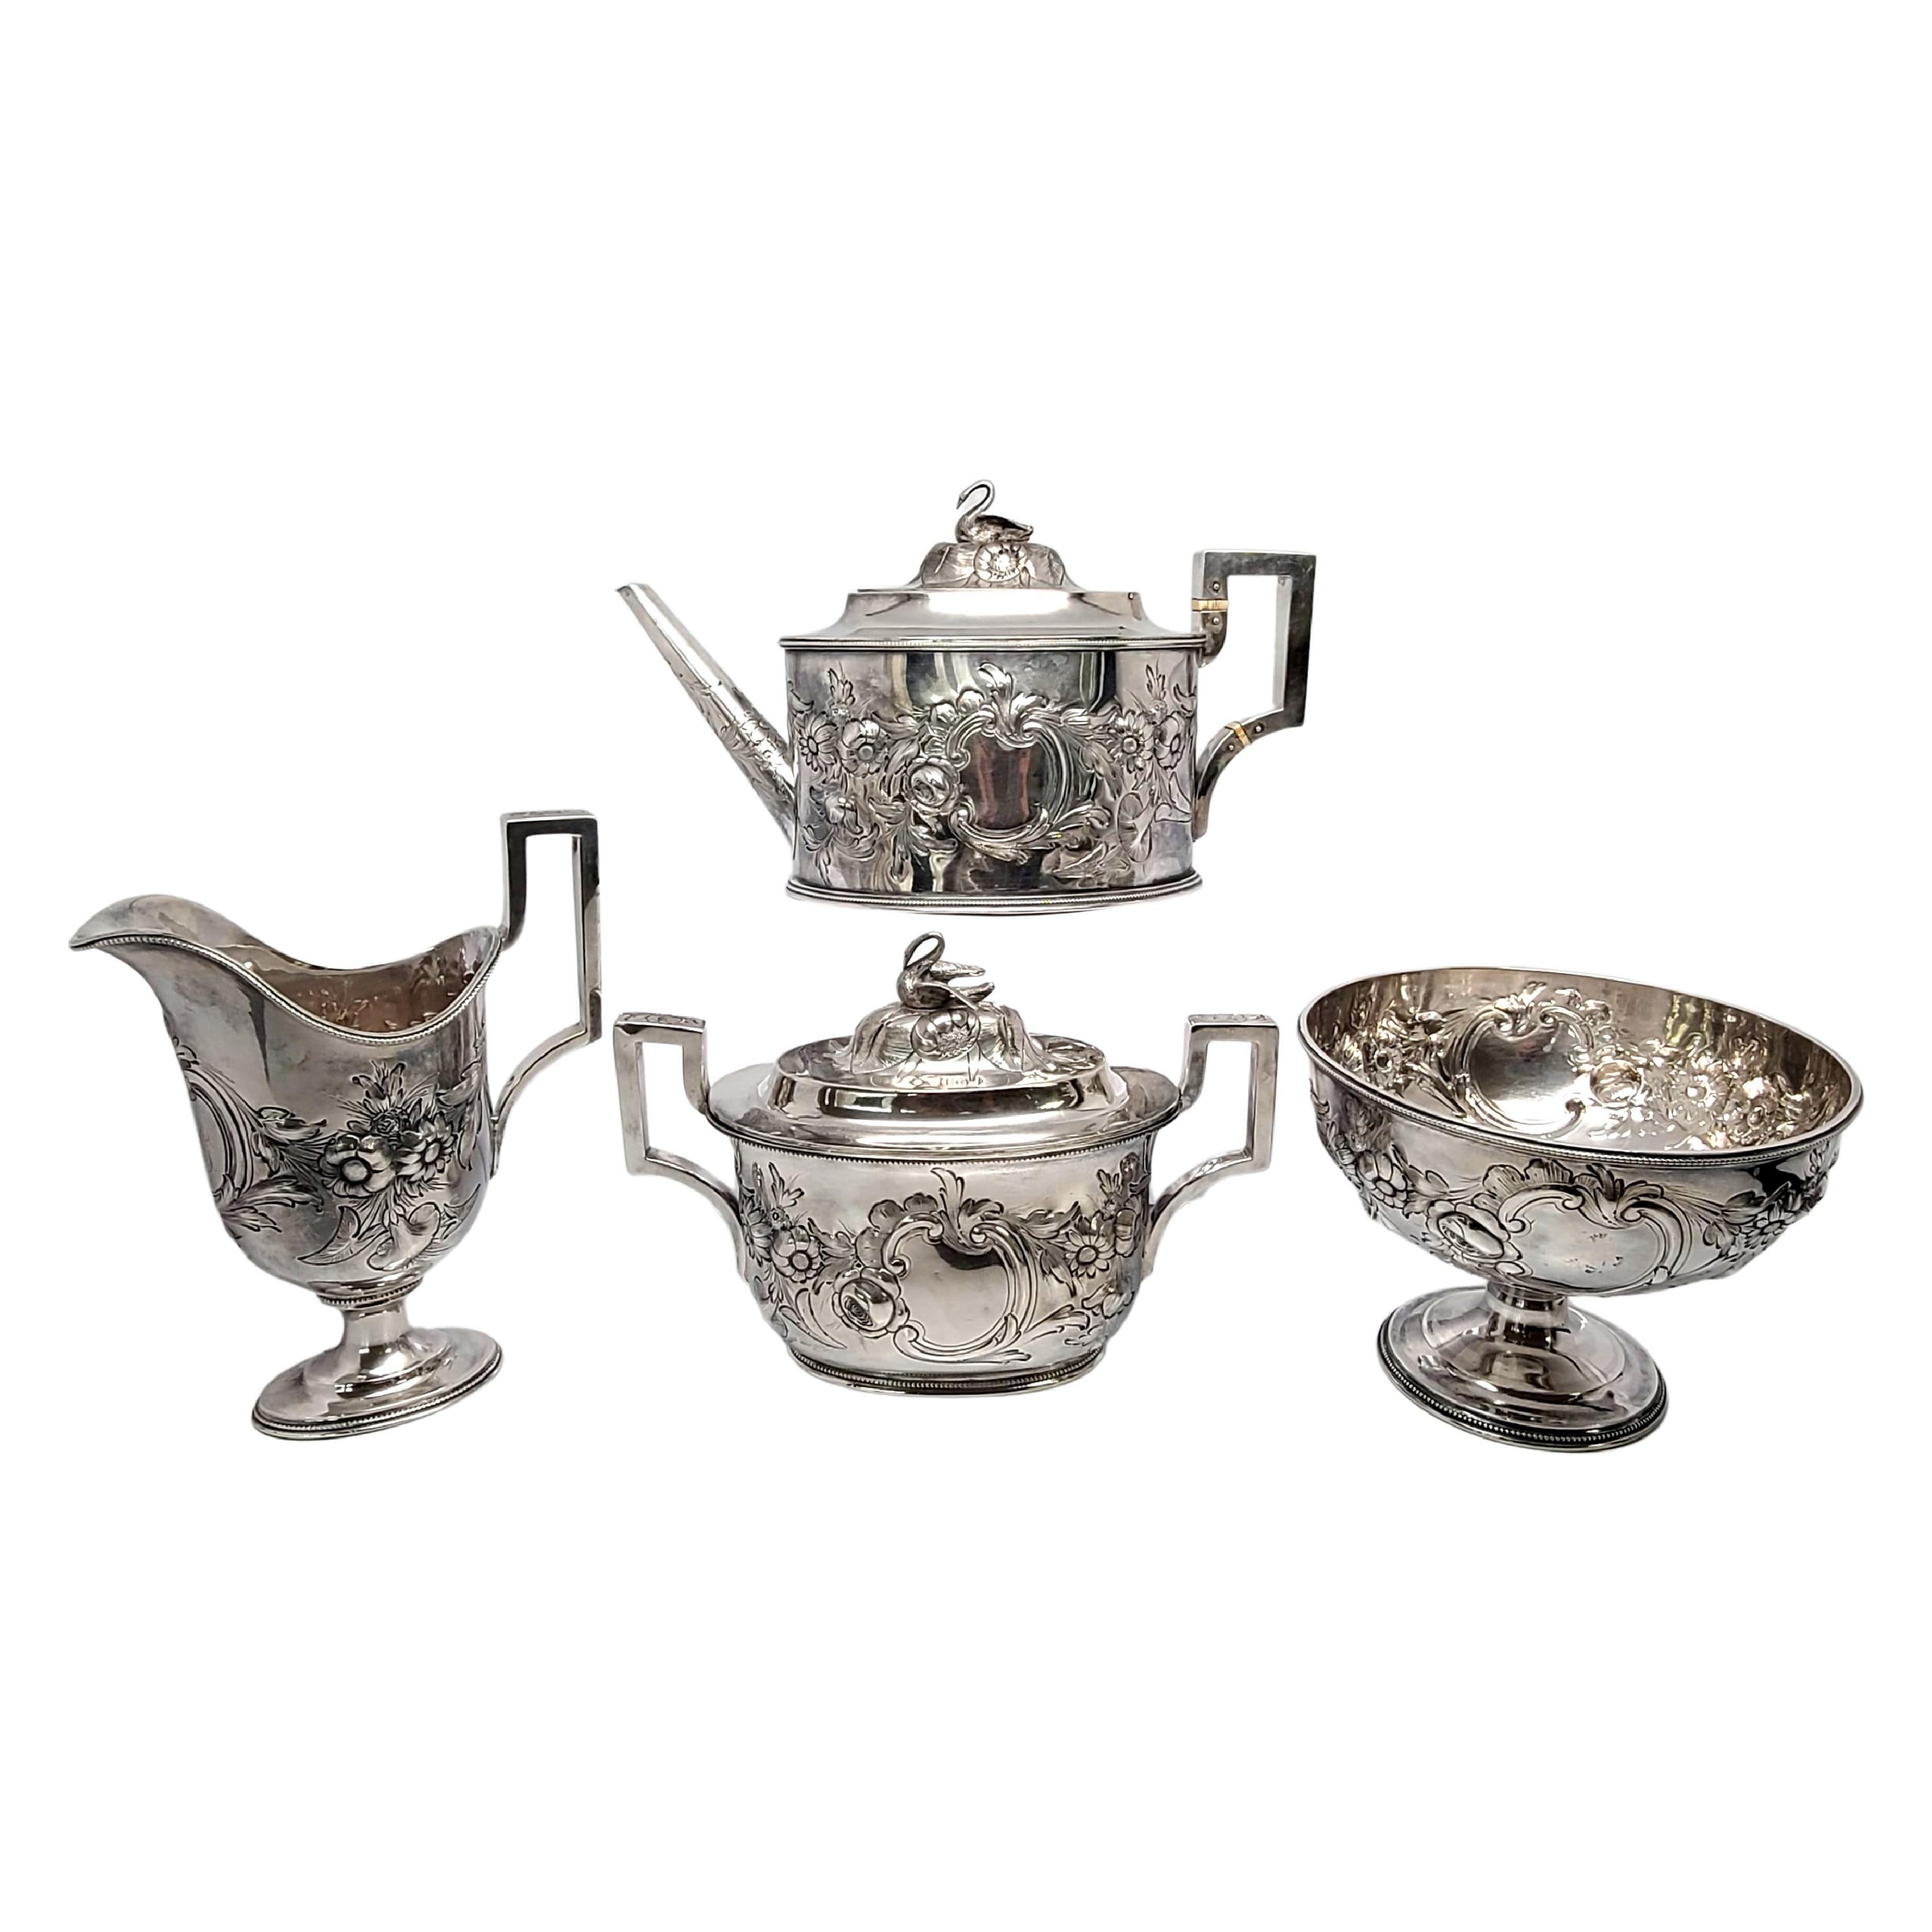 Antique sterling silver 4 piece tea set by Tiffany Young & Ellis, designed by John C. Moore, circa 1841-53.

Tiffany Young & Ellis was started by Charles Lewis Tiffany, John B Young and J. Lewis Ellis, and was known for selling the finest goods from